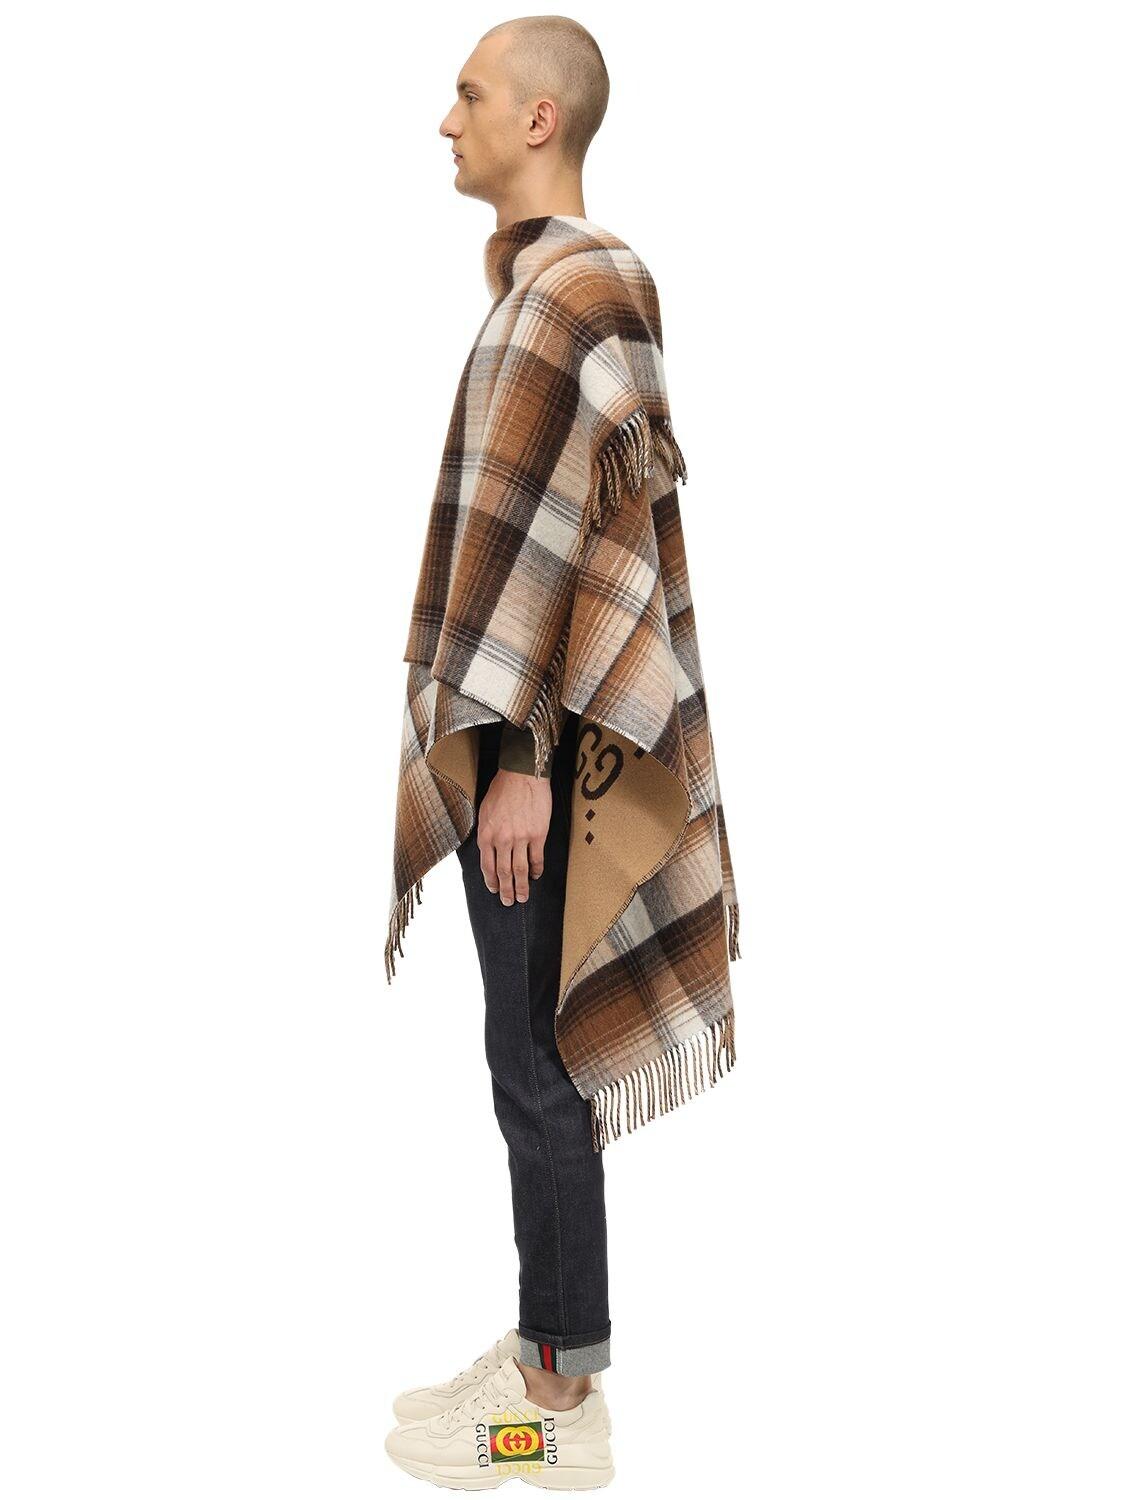 Gucci Reversible Logo Wool Poncho Cape in Beige/Brown (Brown) for Men | Lyst